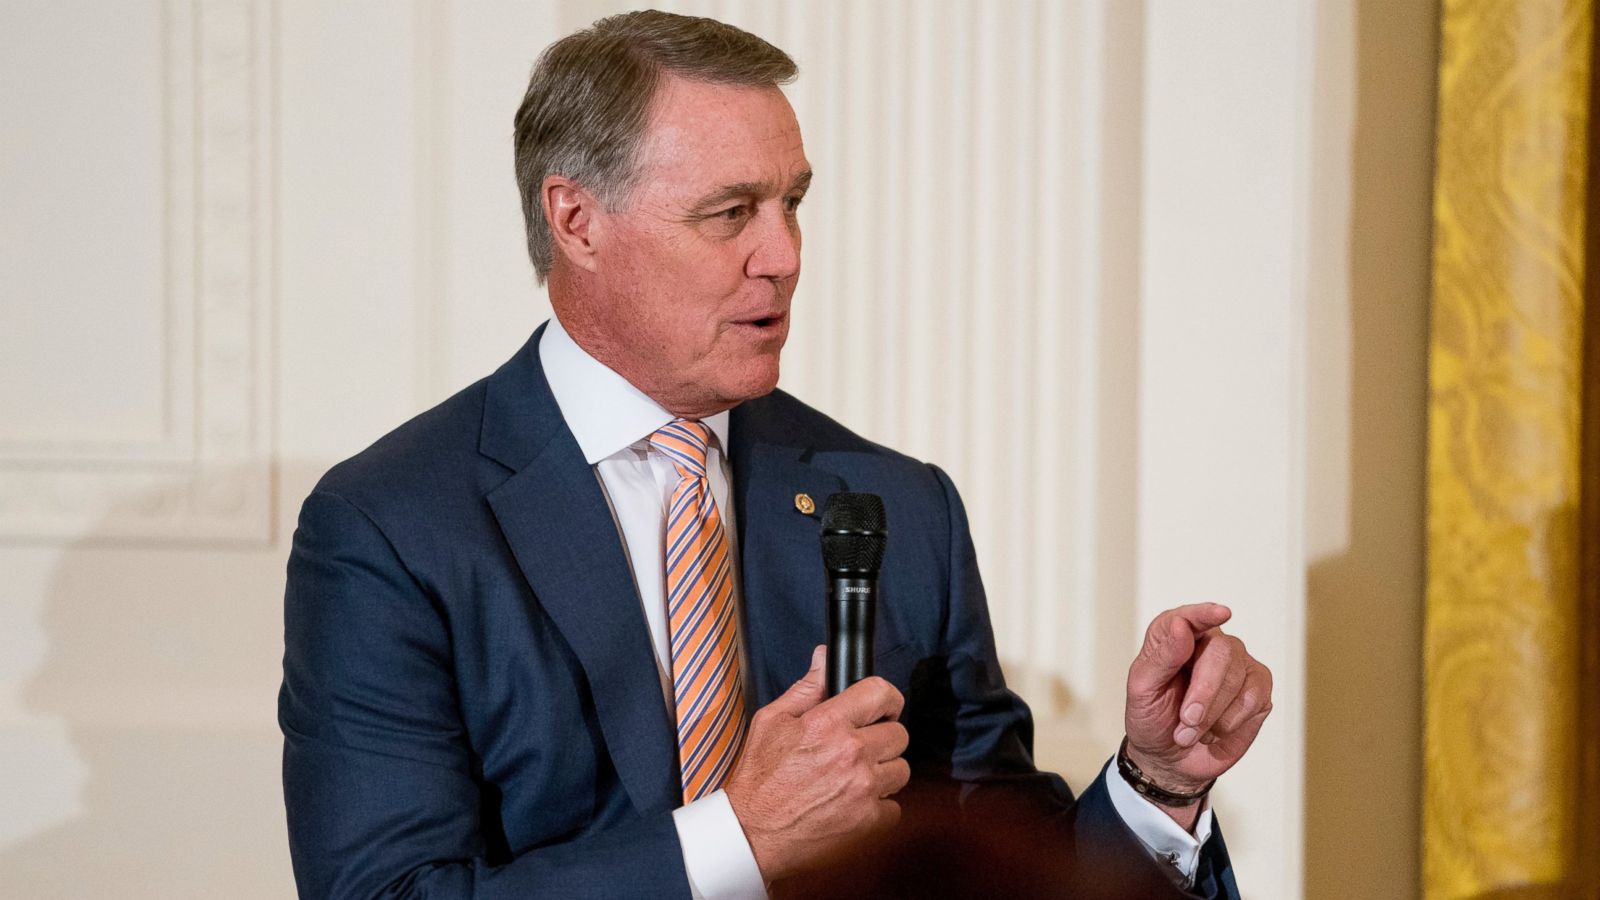 Sen. David Perdue rips phone out of student's hand as he's asking question - ABC News